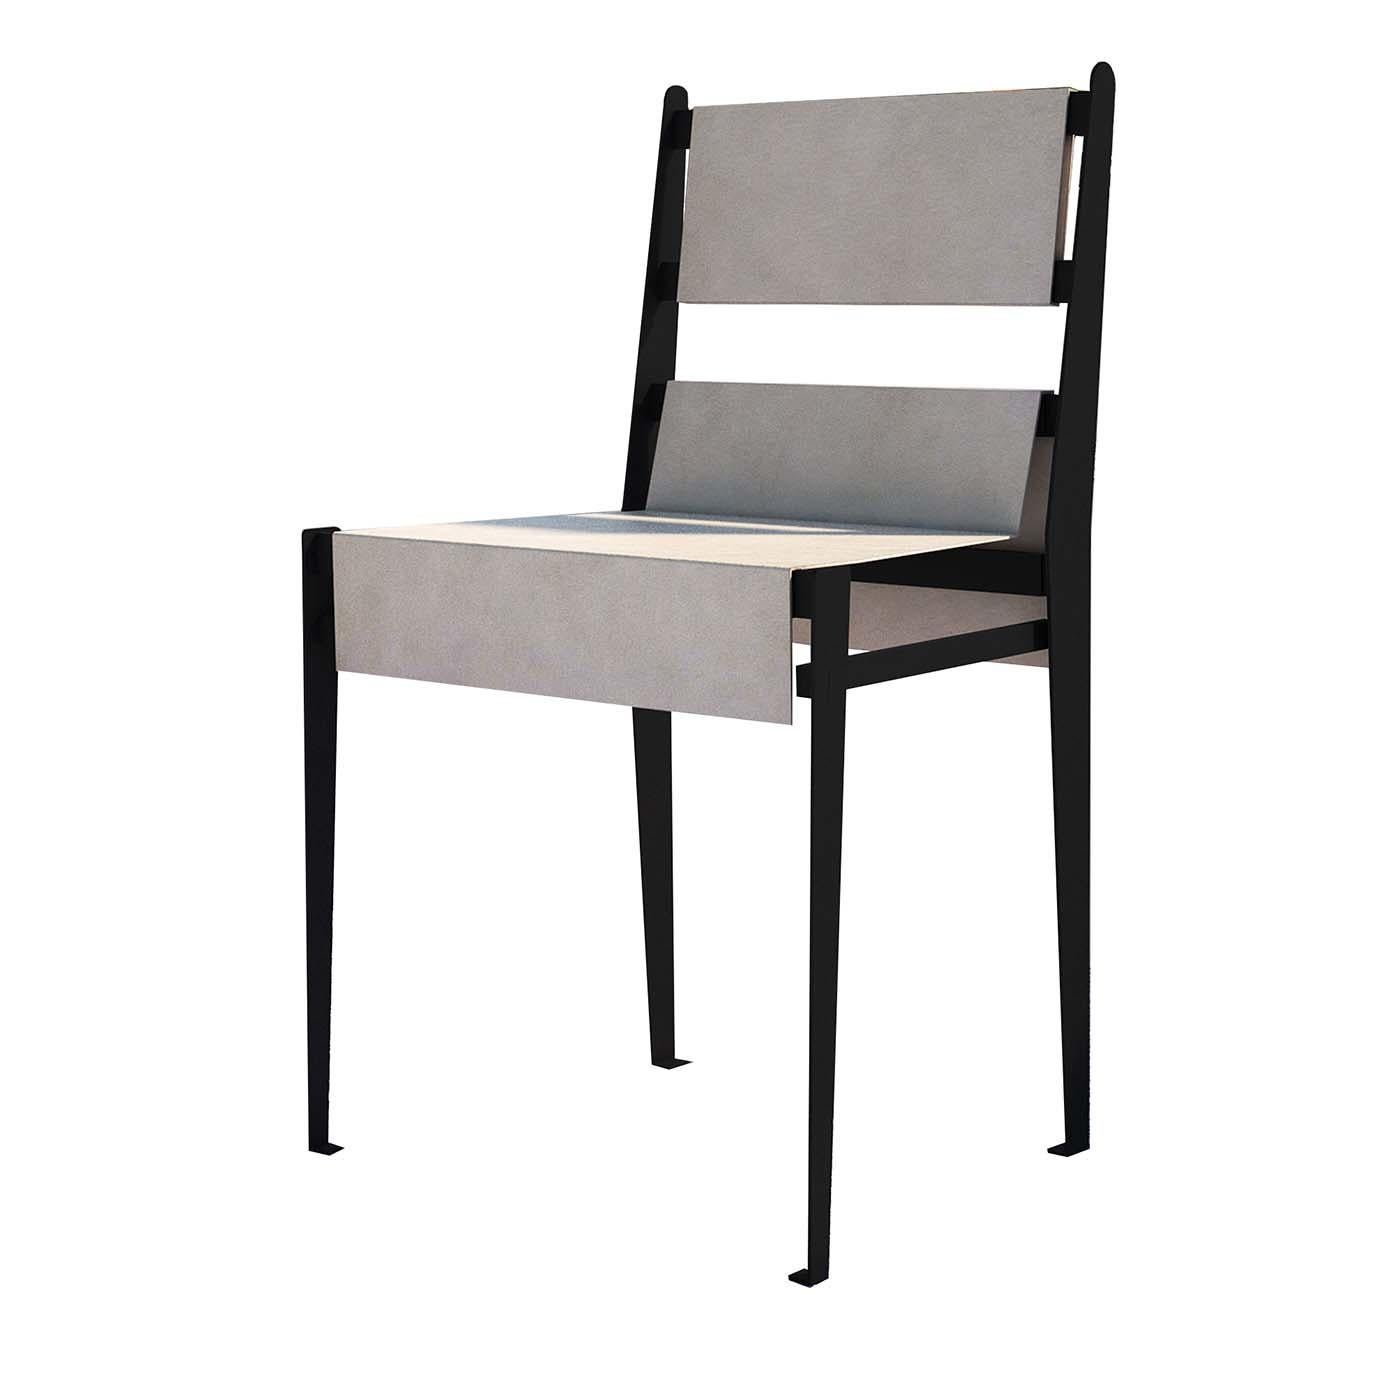 Piana Chair by Notempo